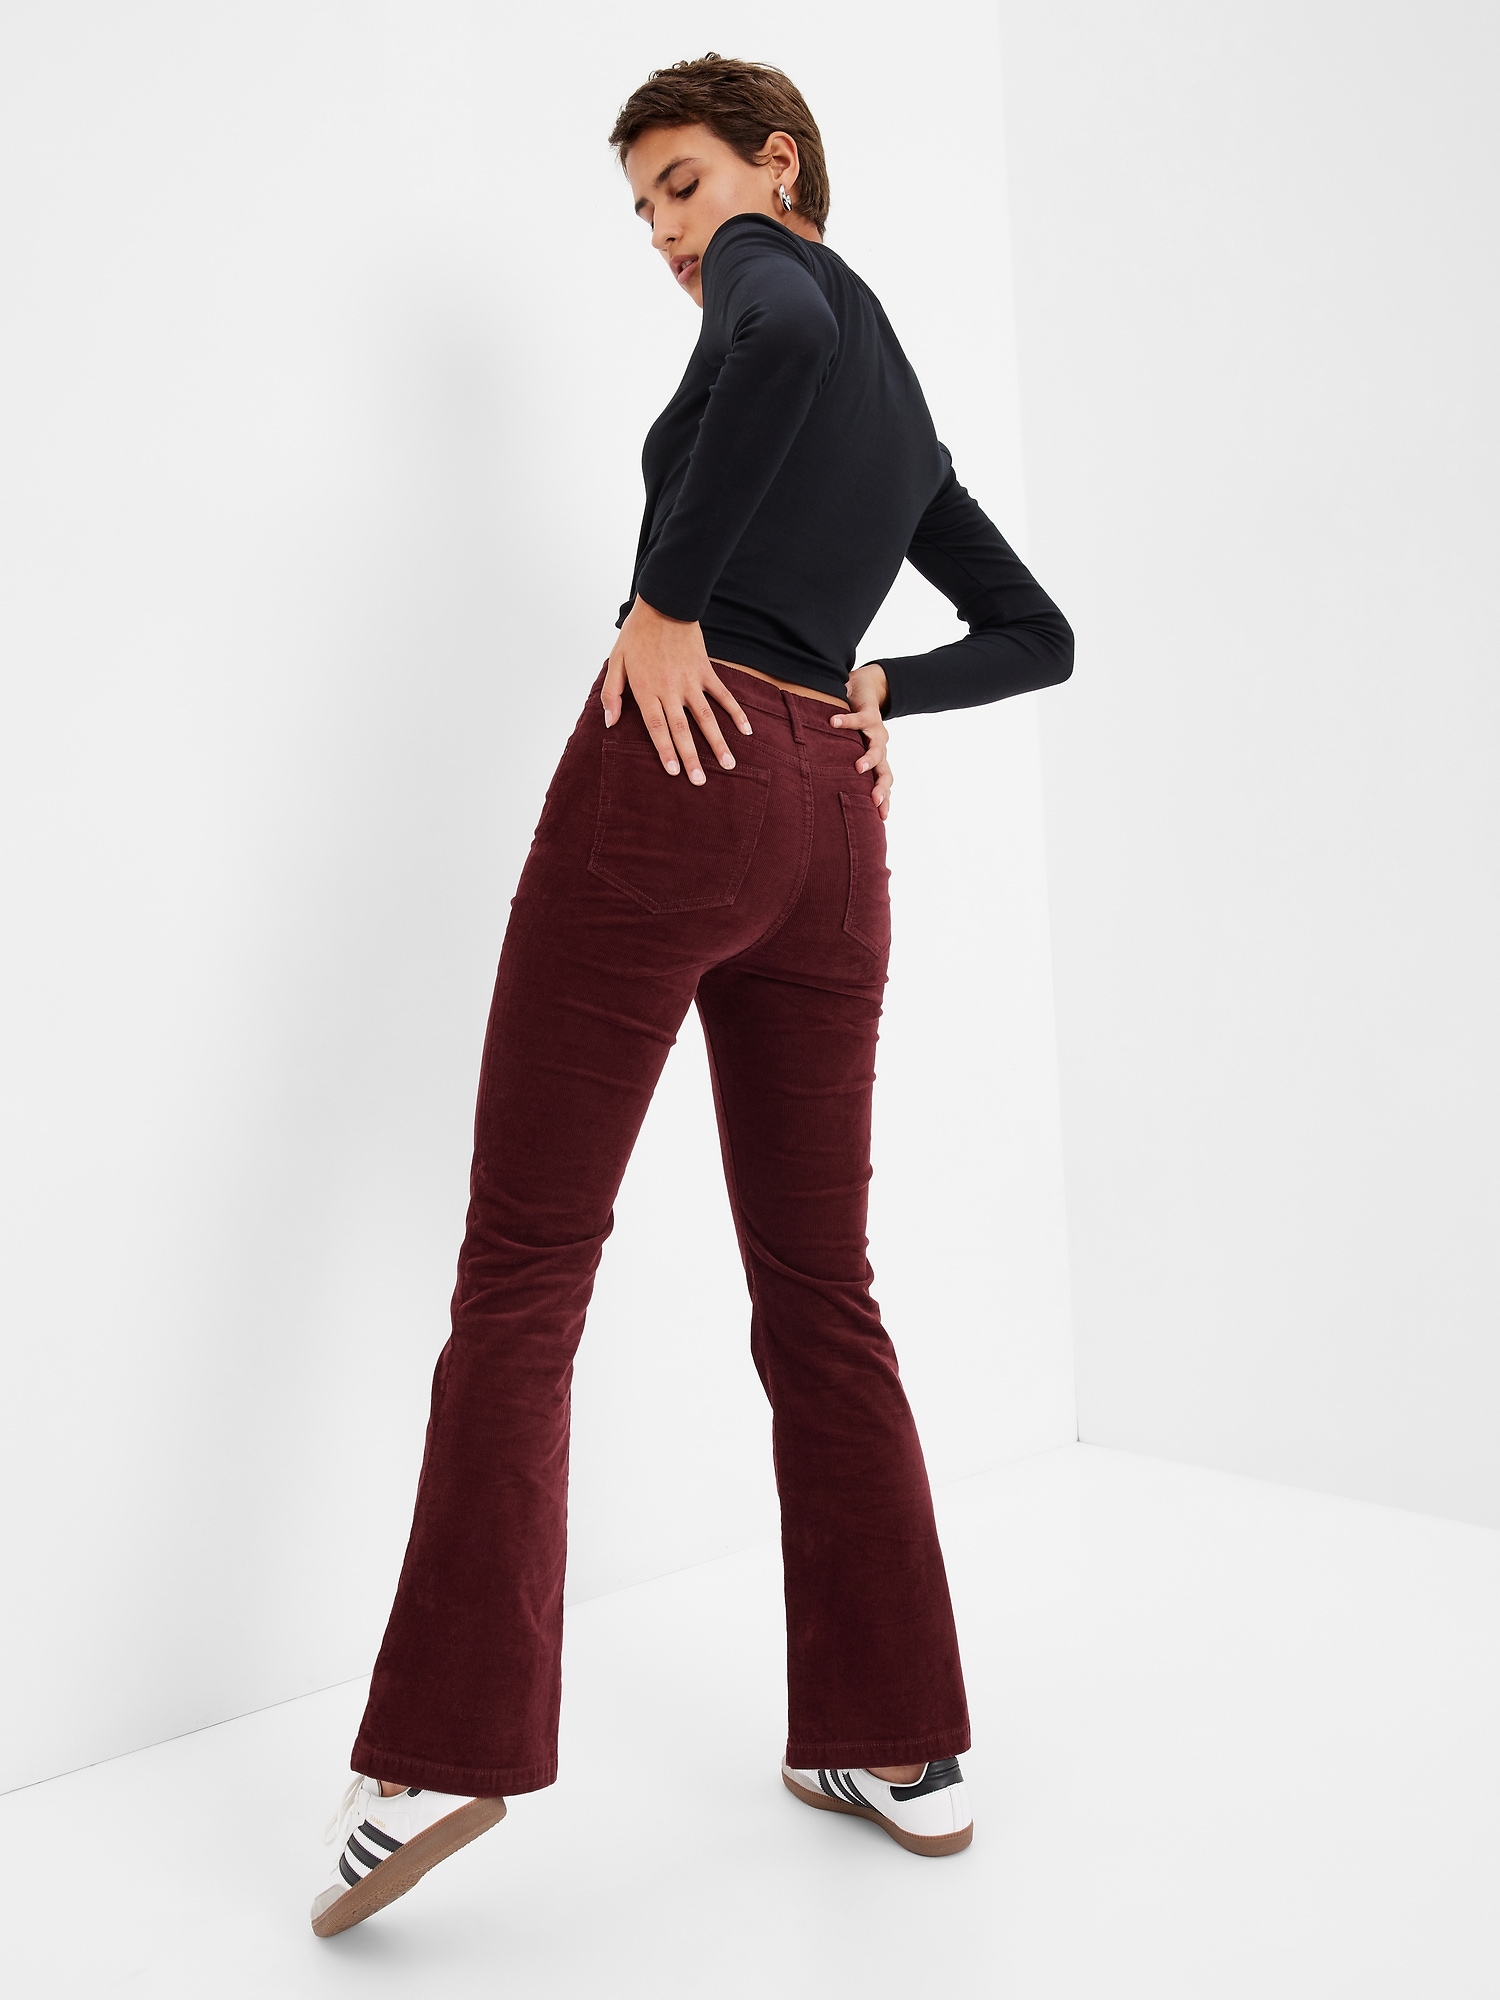 The Petite Perfect Vintage Flare Pant in Corduroy